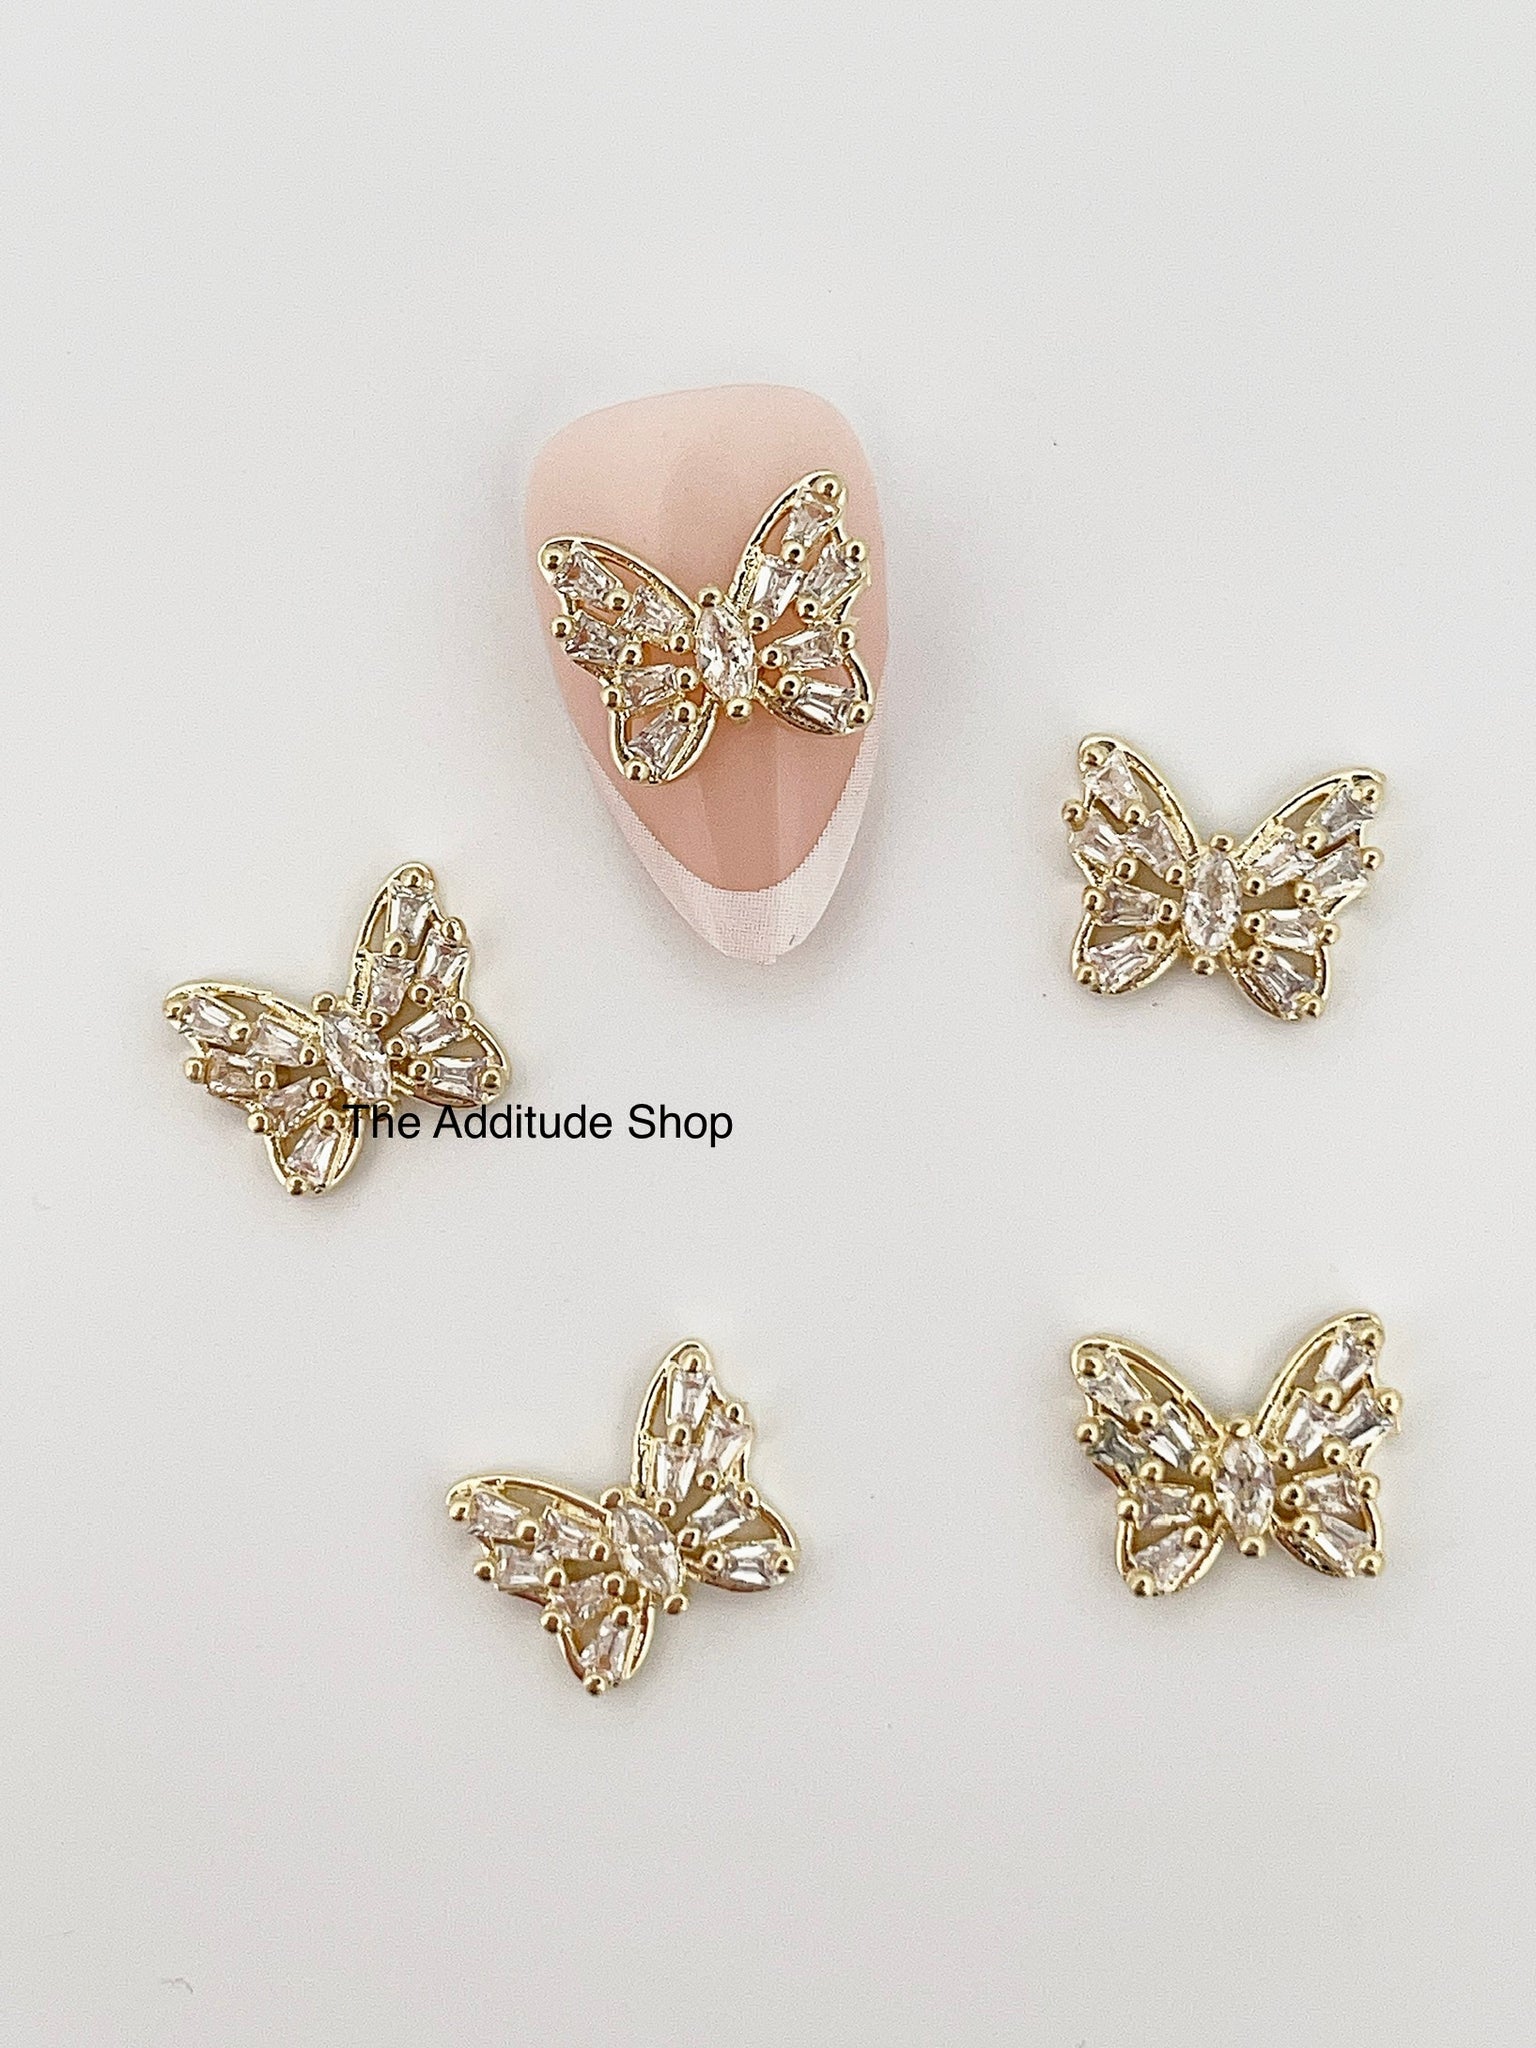 3D Zircon Nail Charms #35 (5 Pieces)